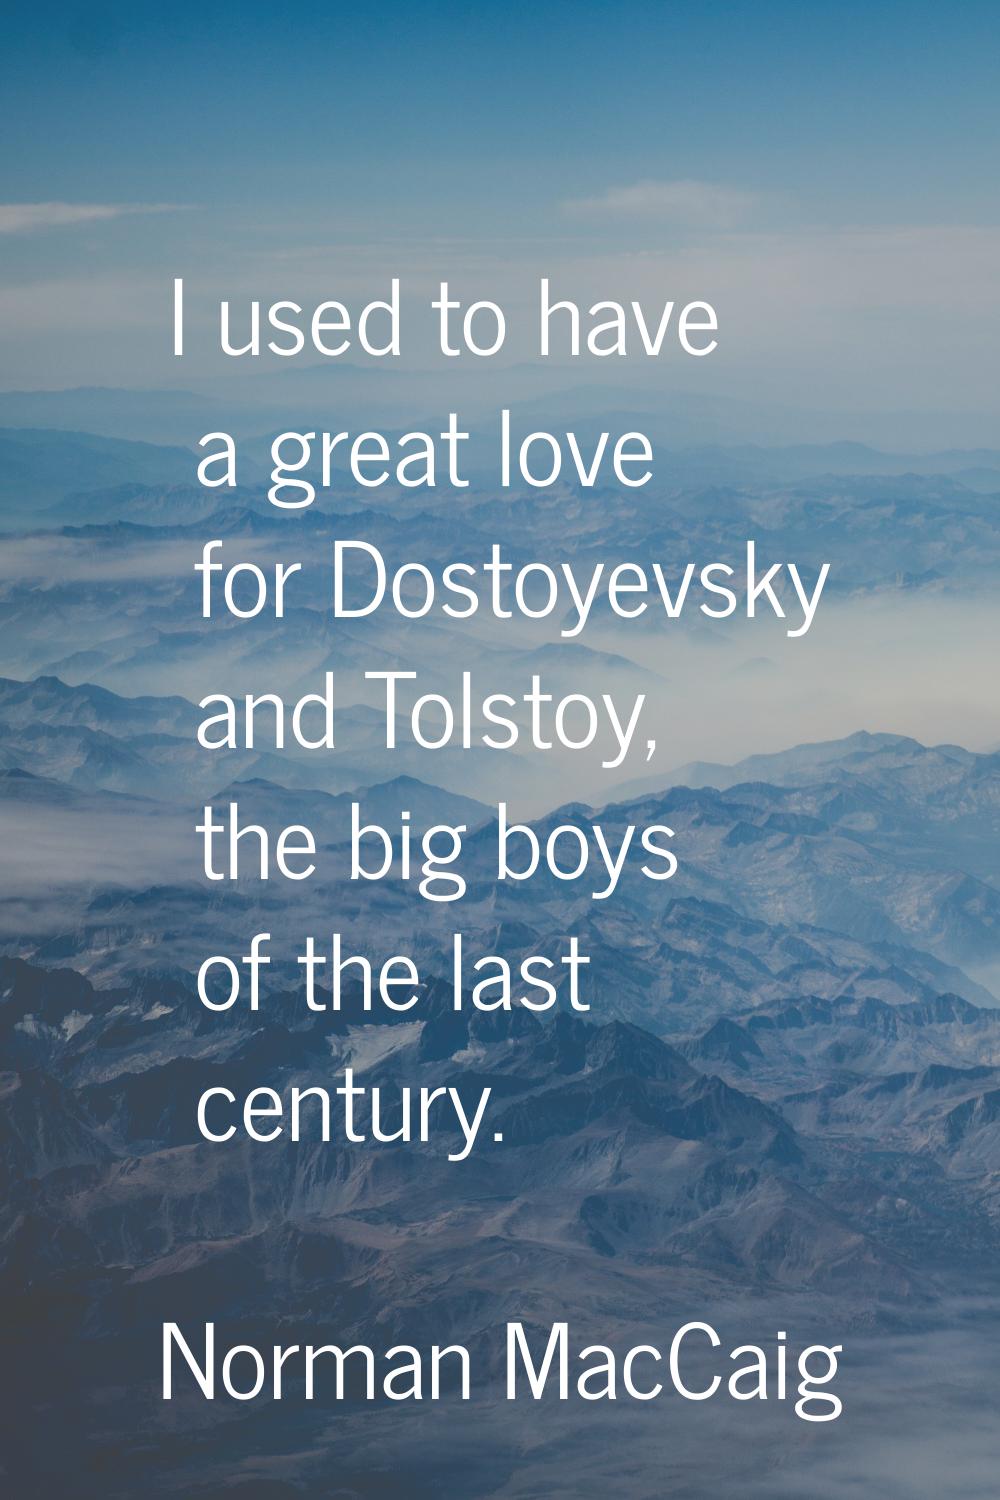 I used to have a great love for Dostoyevsky and Tolstoy, the big boys of the last century.